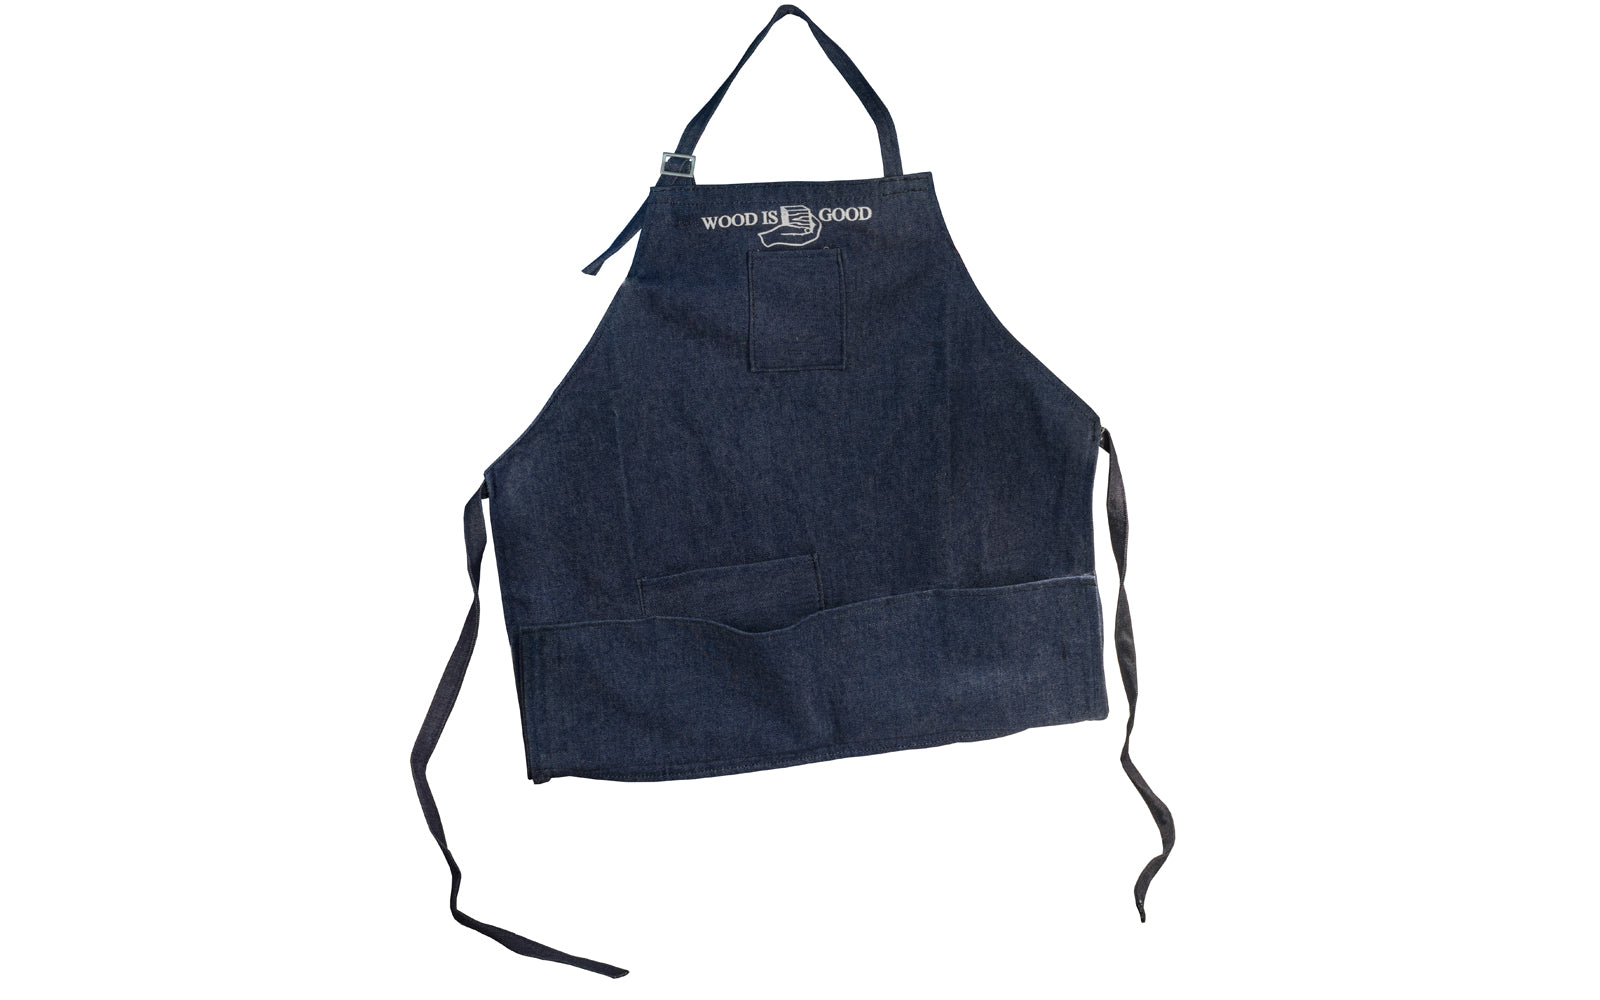 Wood is Good Denim Woodworker's Apron ~ Model WD304 - Made in USA